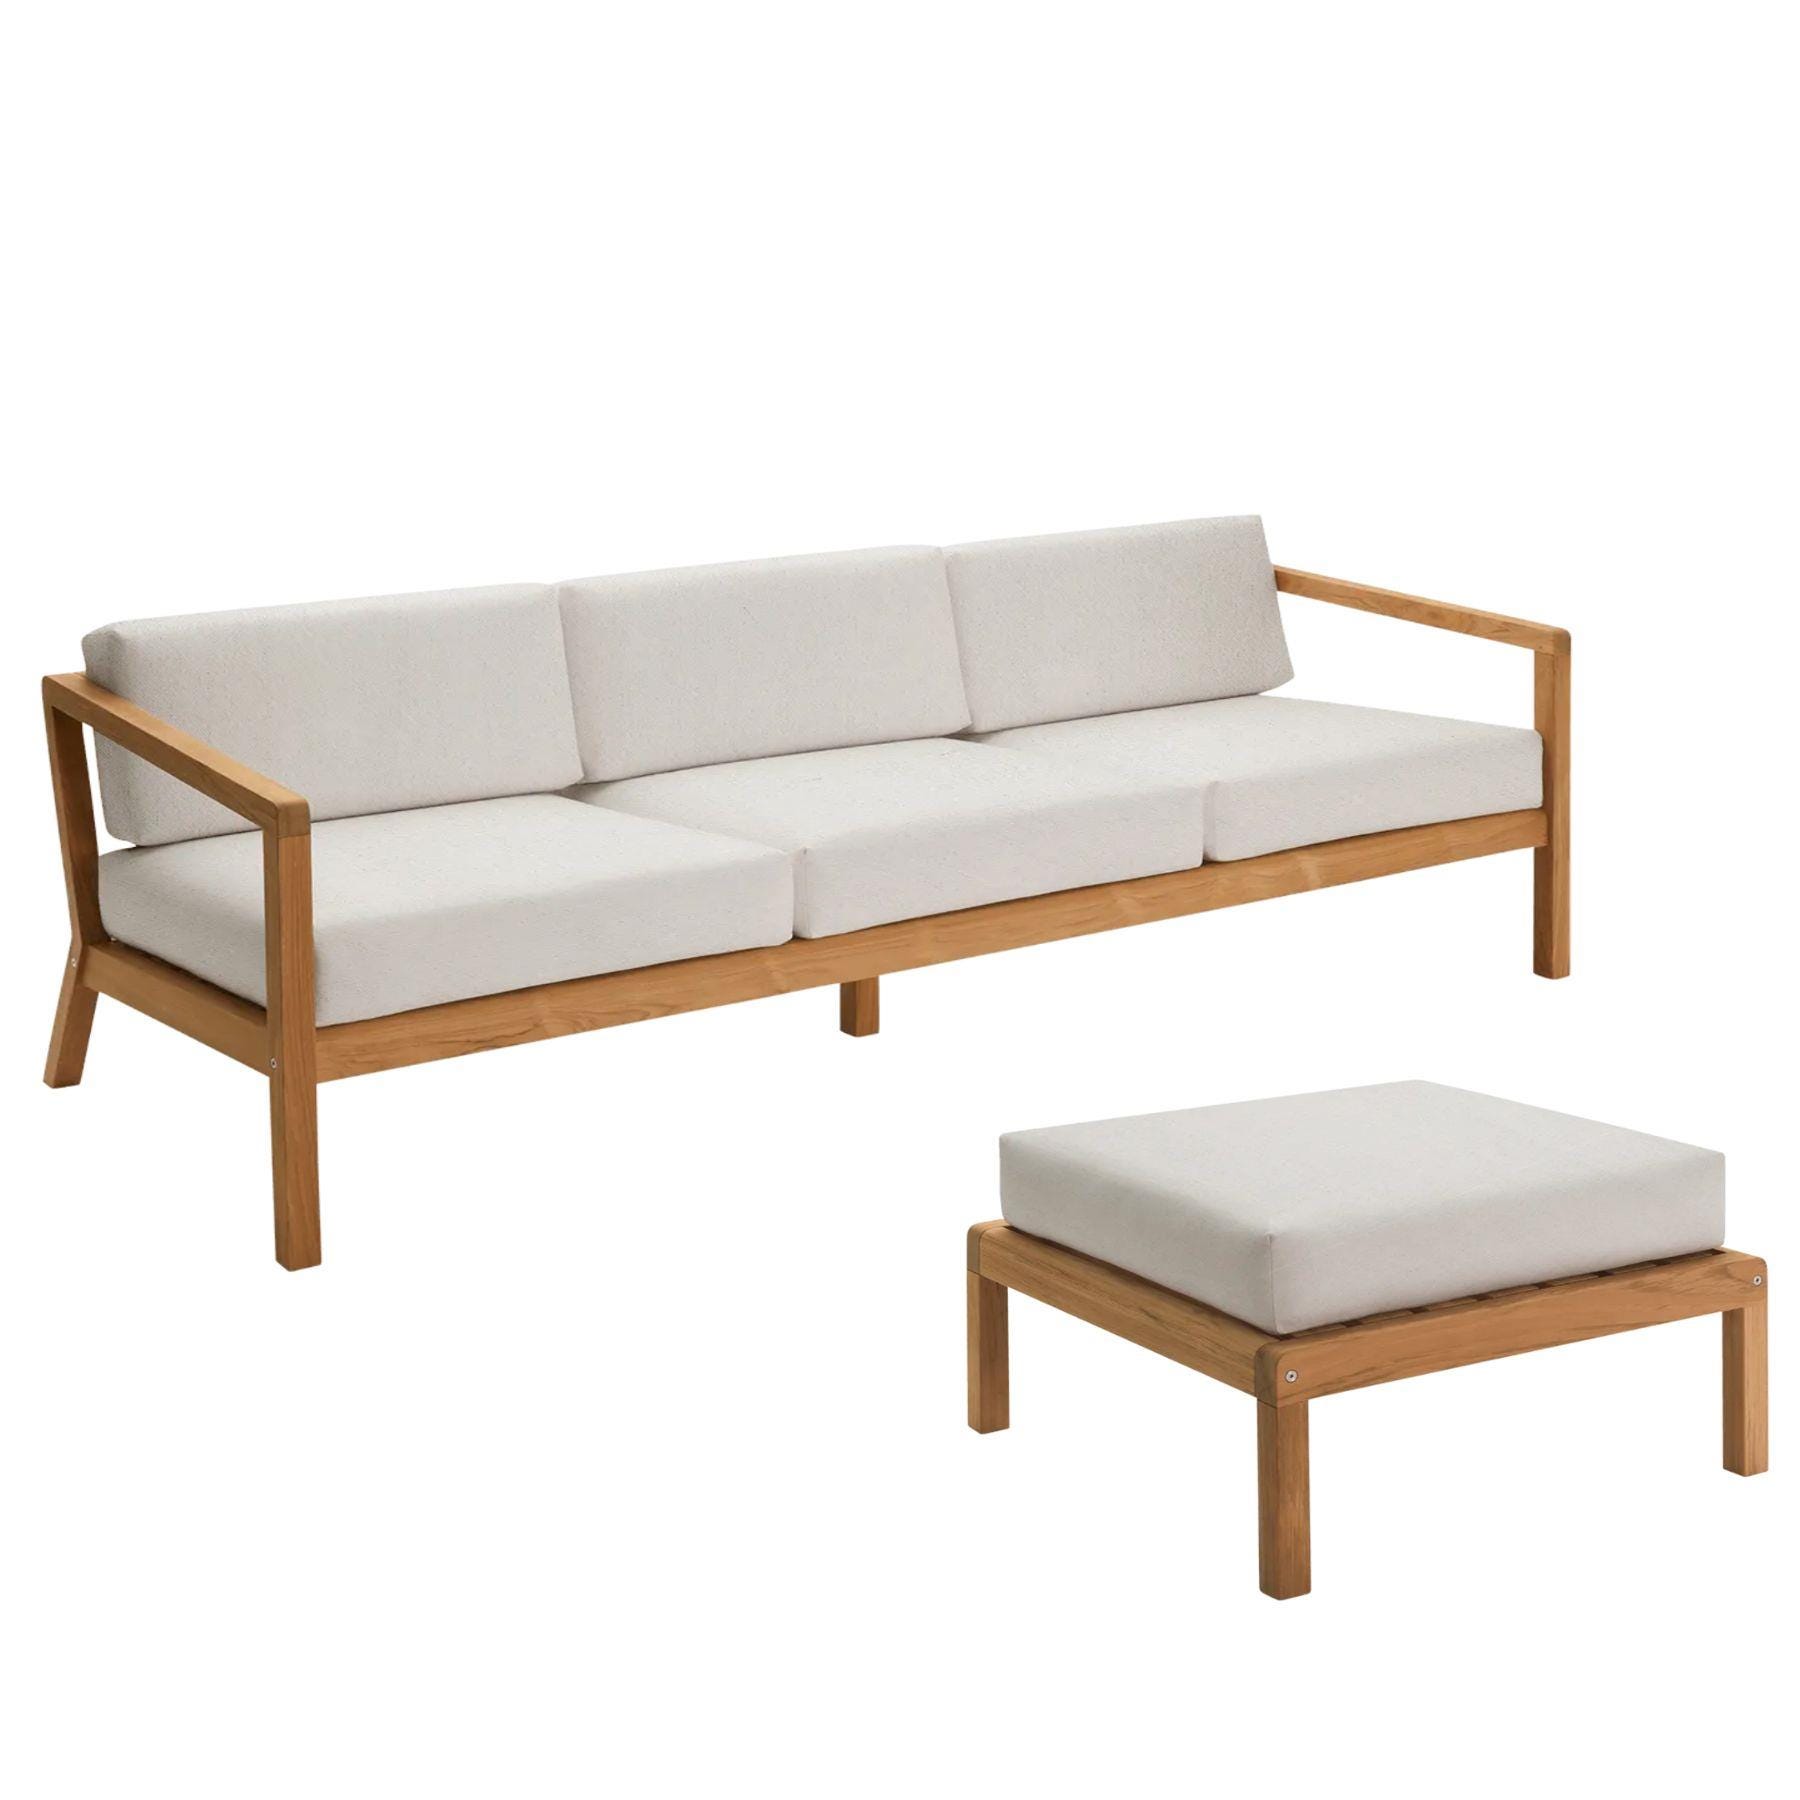 Fritz Hansen Virkelyst Sofa 3 Seater Papyrus With Footstool White Designer Furniture From Holloways Of Ludlow